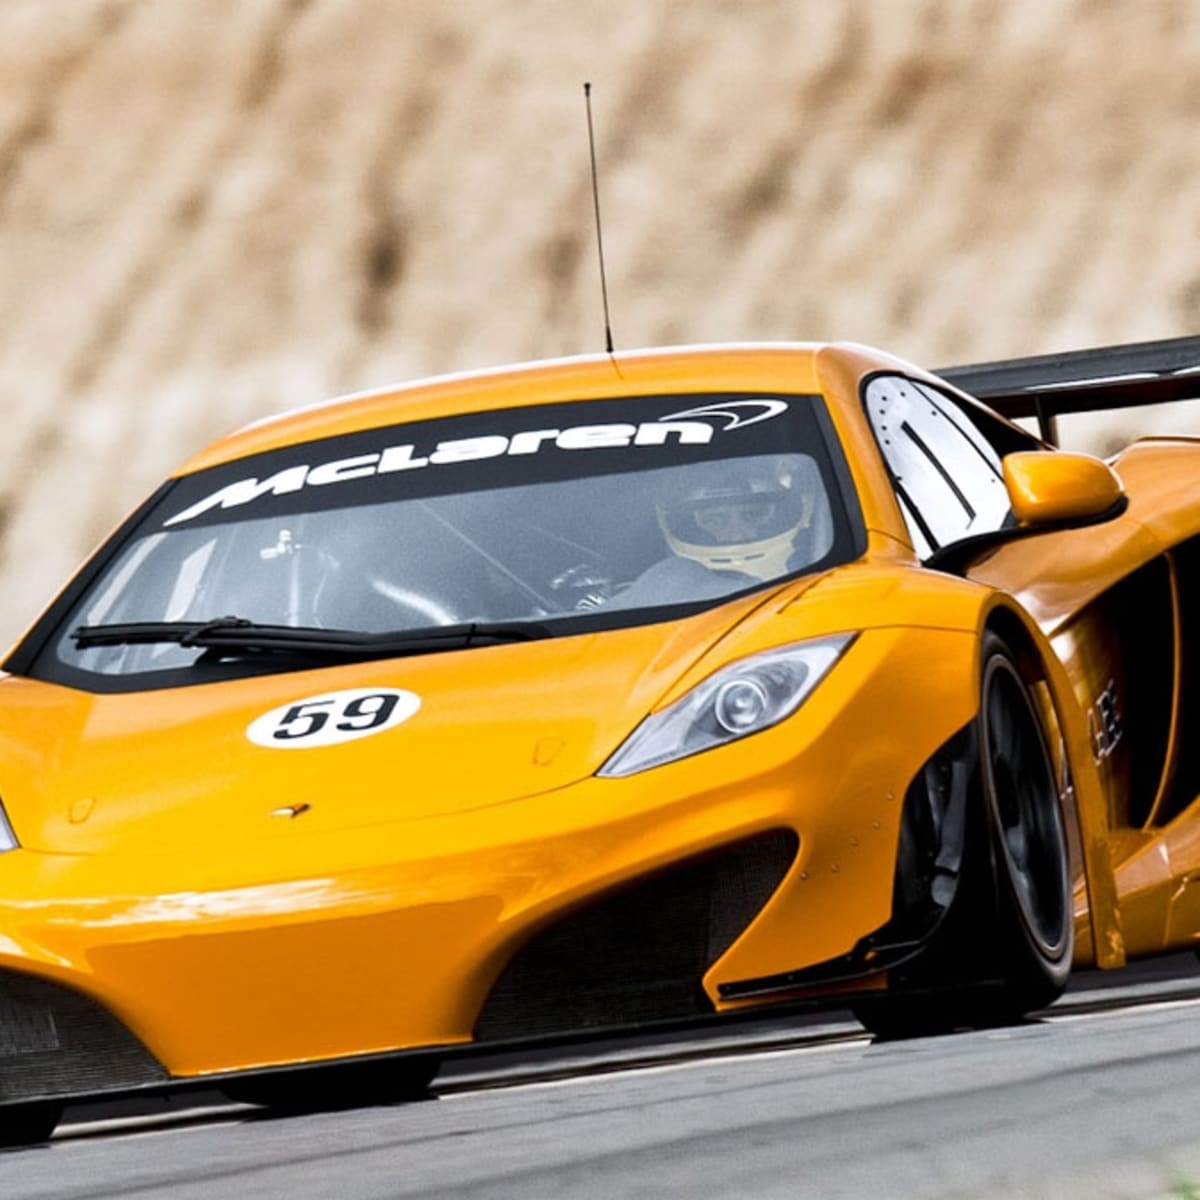 Mclaren Mp4 12c Gt3 Details And Price Announced Caradvice